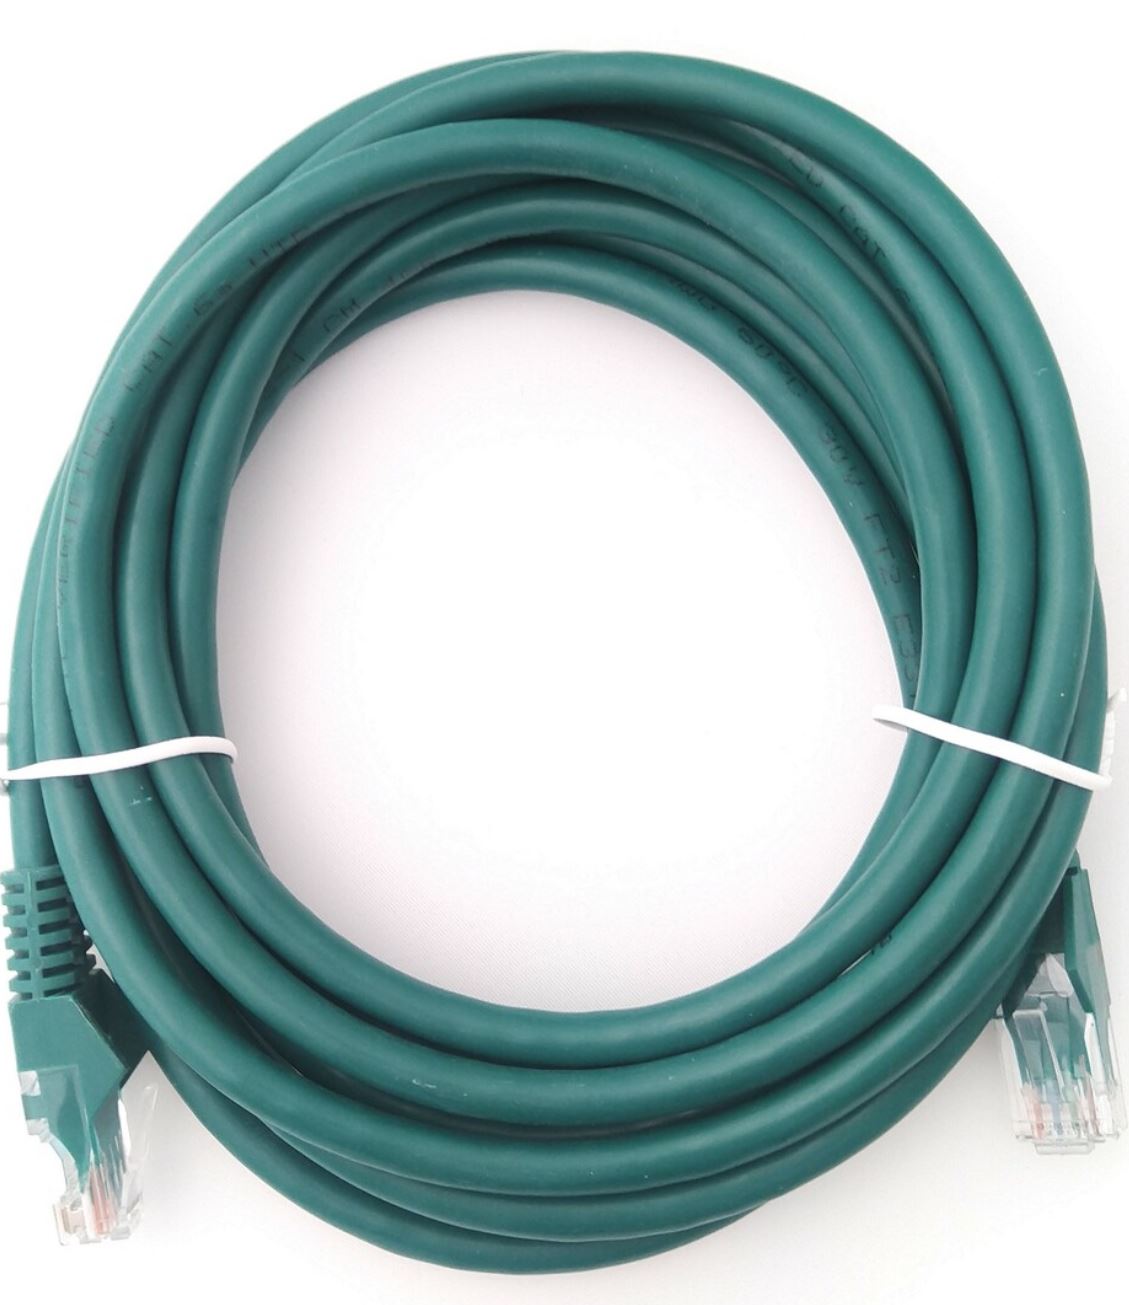 10m UTP Ethernet Cable (Green, Cat 6A)